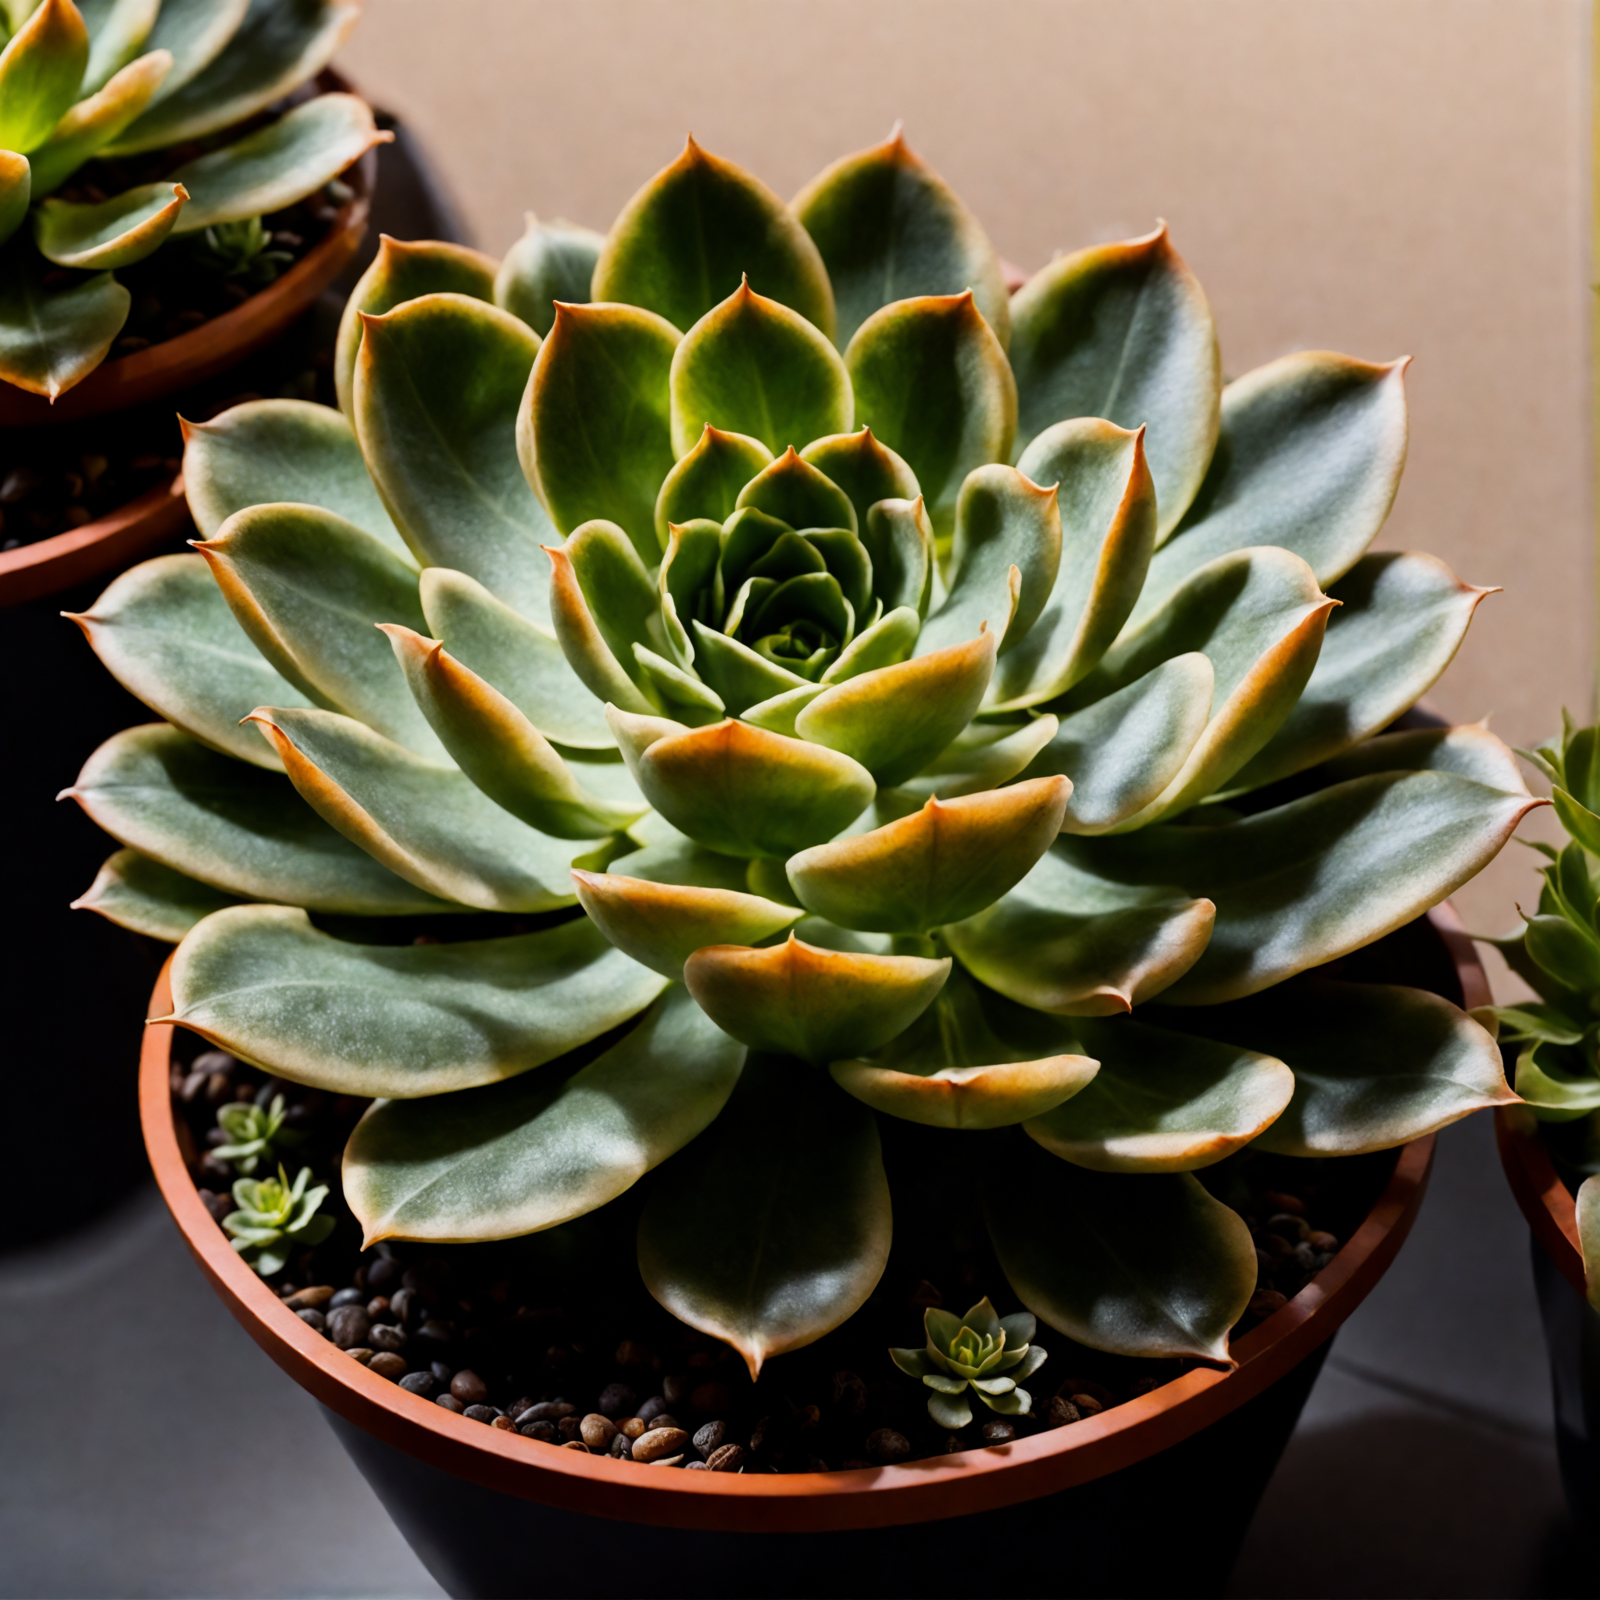 Echeveria elegans in a bowl planter, with clear lighting against a dark background, as part of indoor decor.